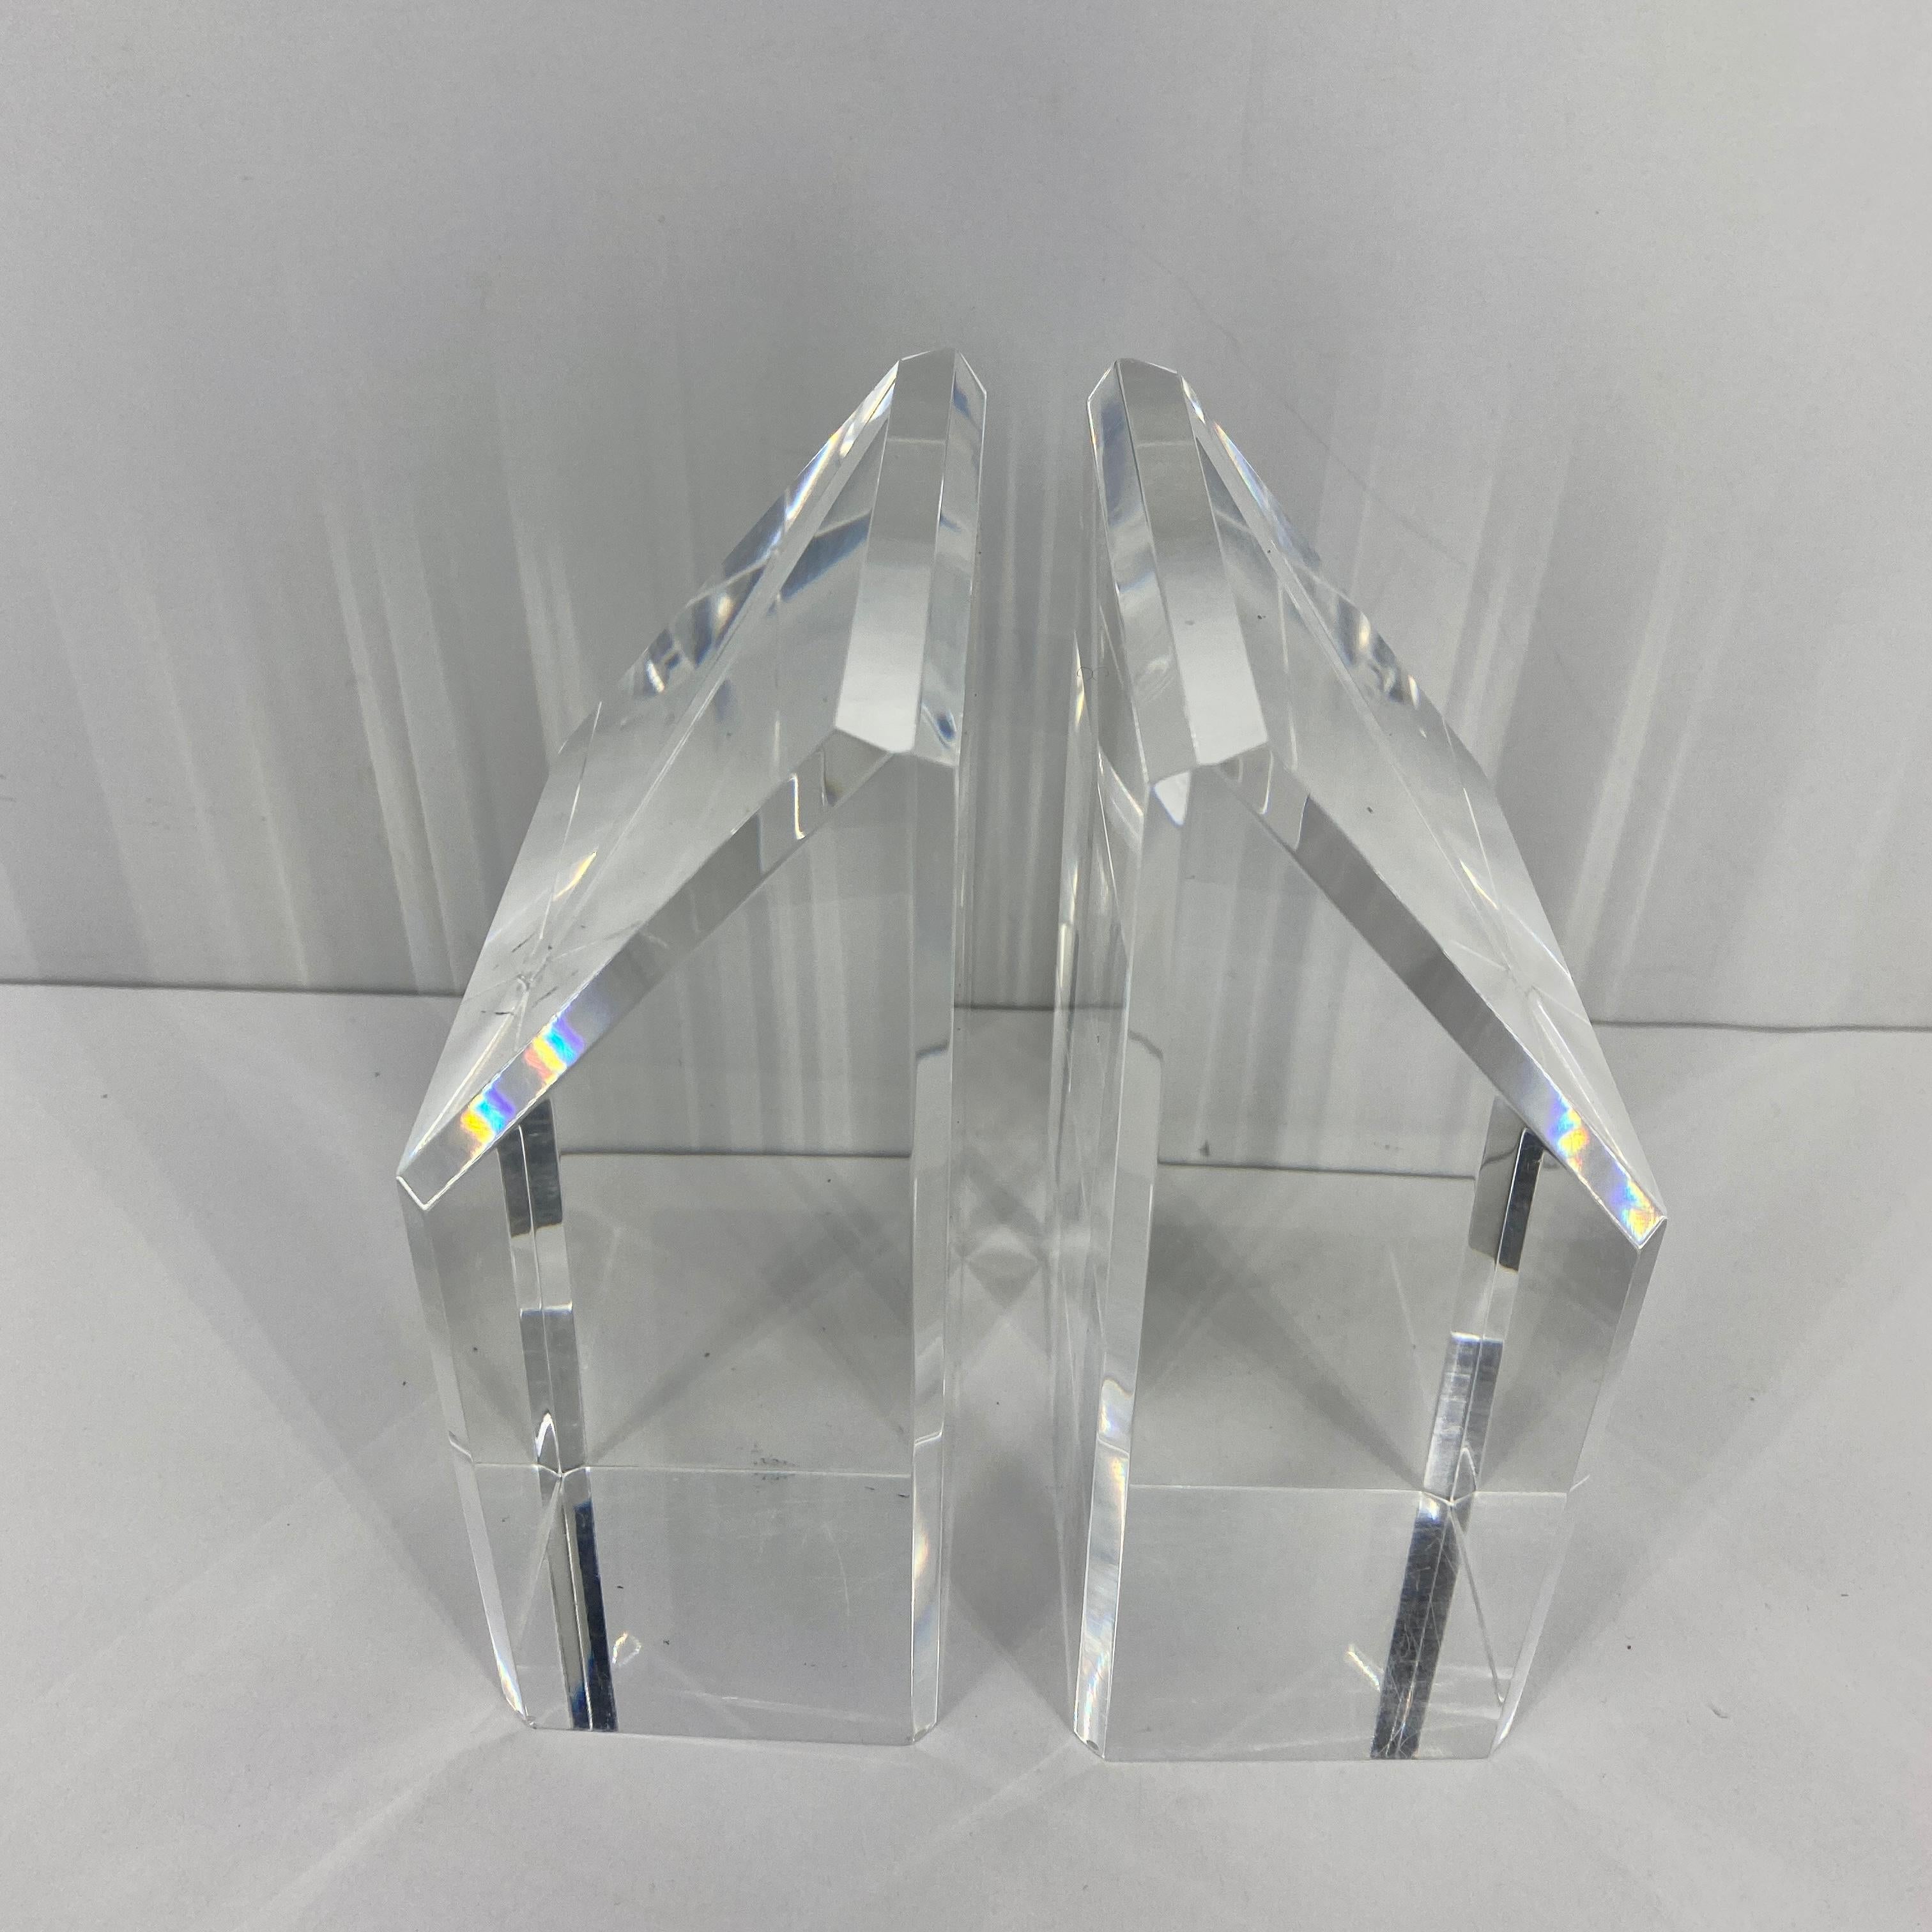 This is a beautiful polished and beveled pair of Lucite bookends. The size is perfect for all sizes of books. The light plays off it's dramatic sloped form almost making the bookends glow. This Lucite set is perfect for display in any modern setting.